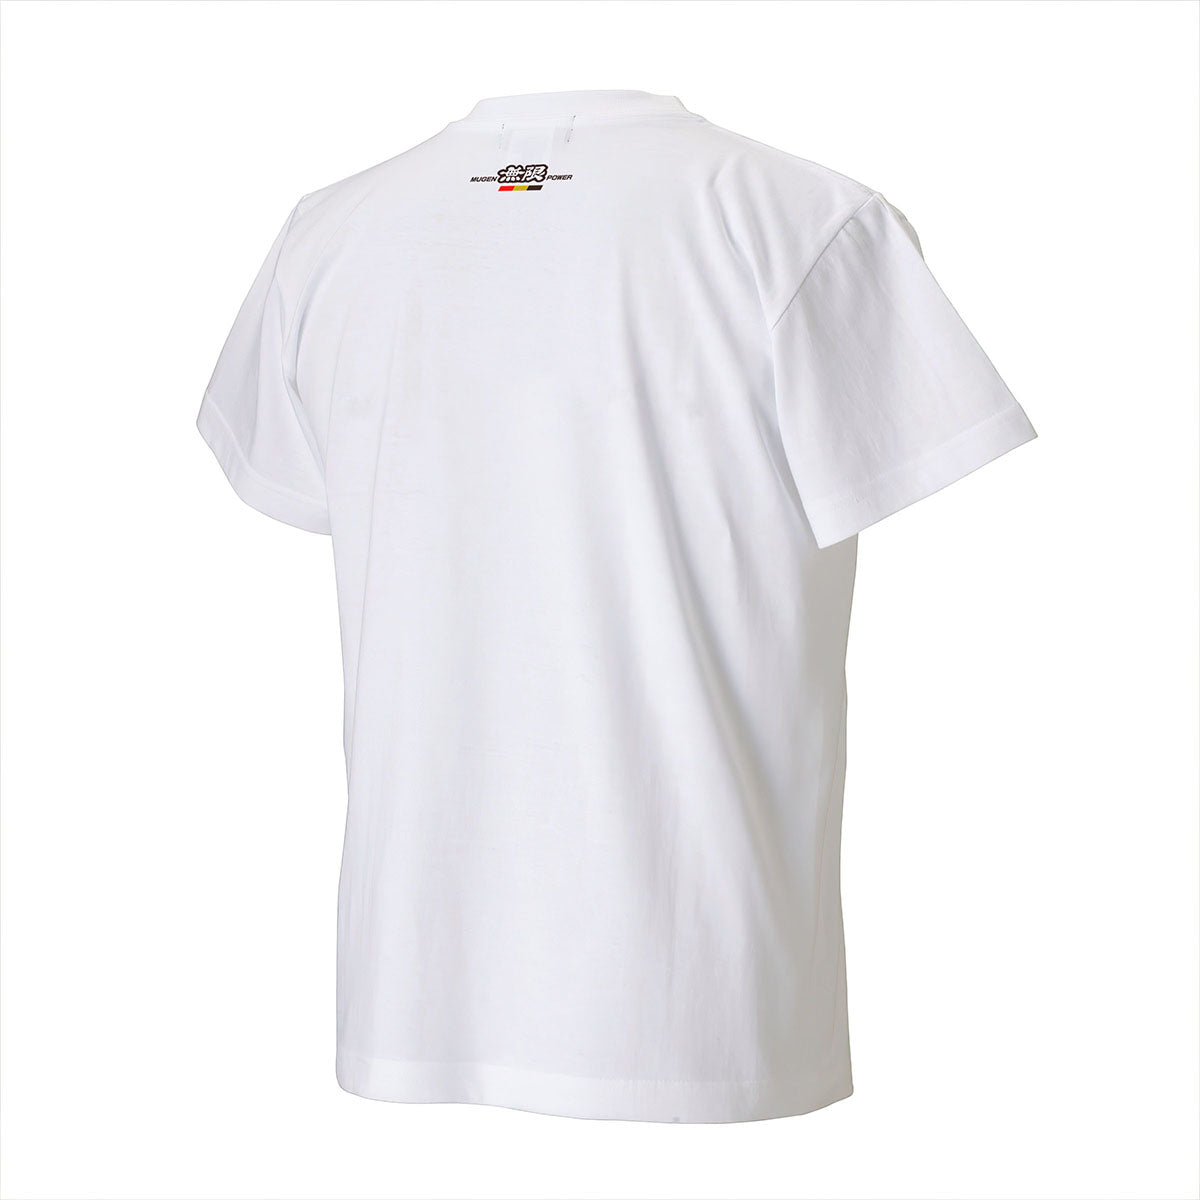 MUGEN MUGEN SF22 T-SHIRT WHITE LARGE FOR  90000-XYM-604A-W4